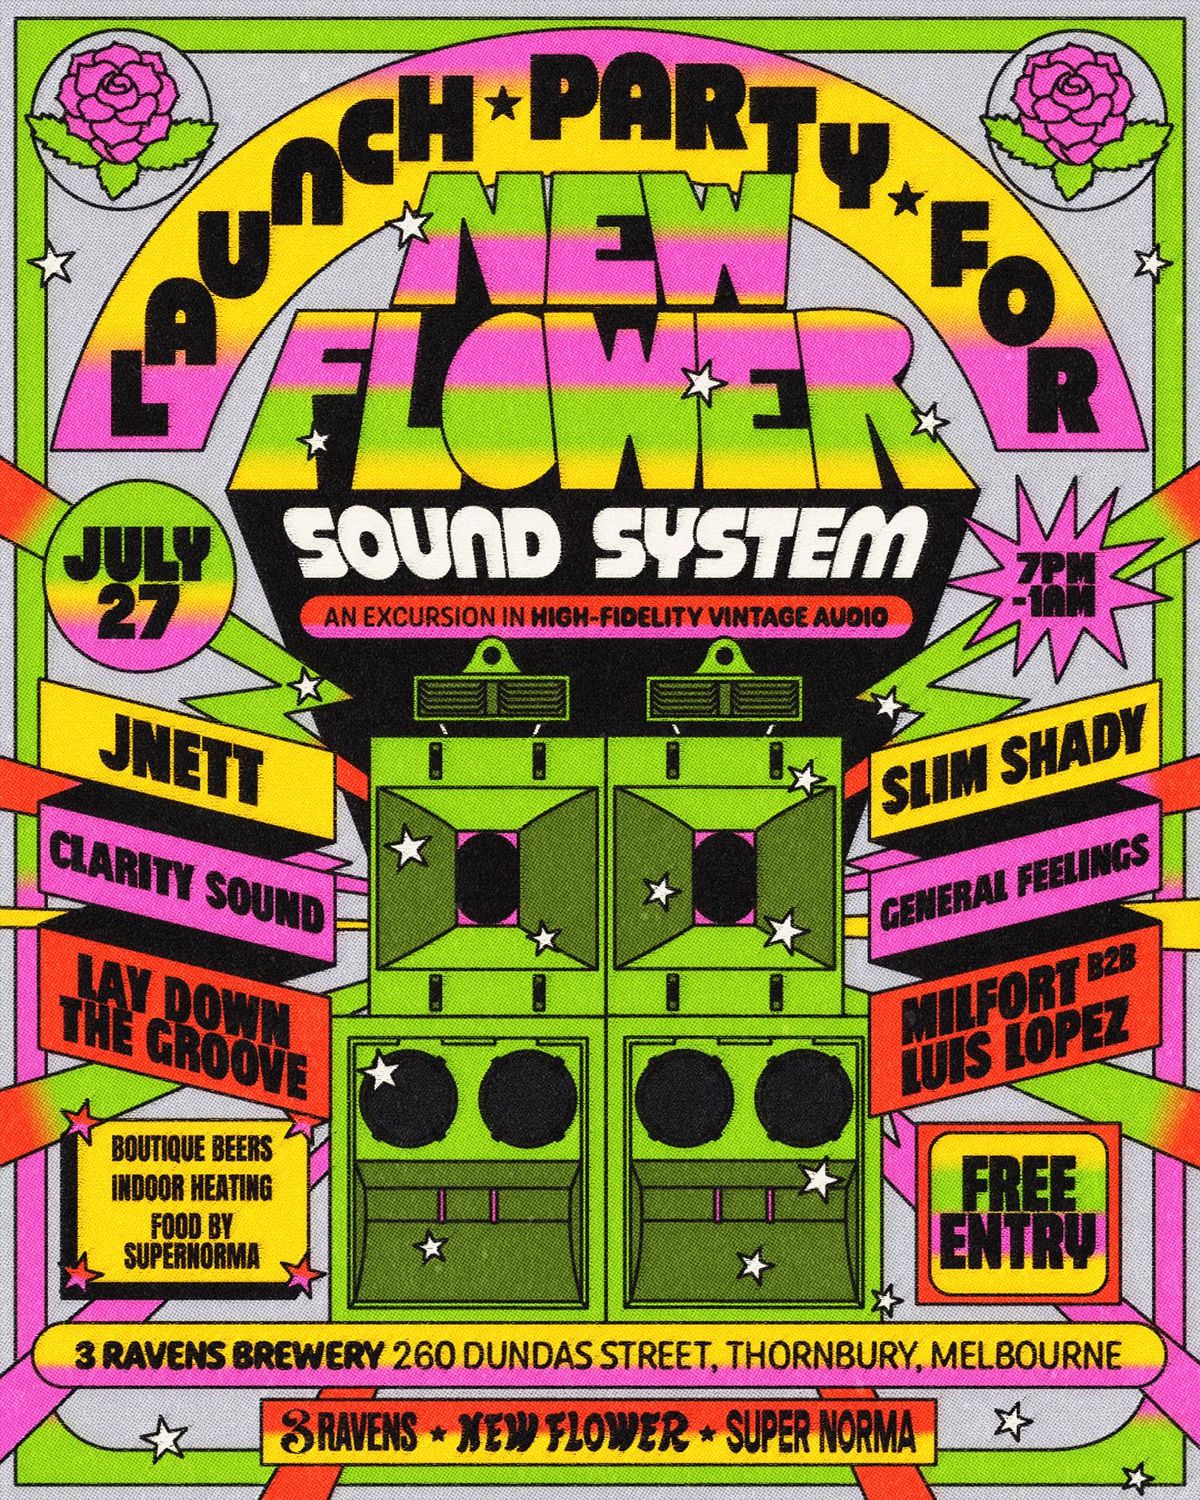 New Flower Sound System Launch Party